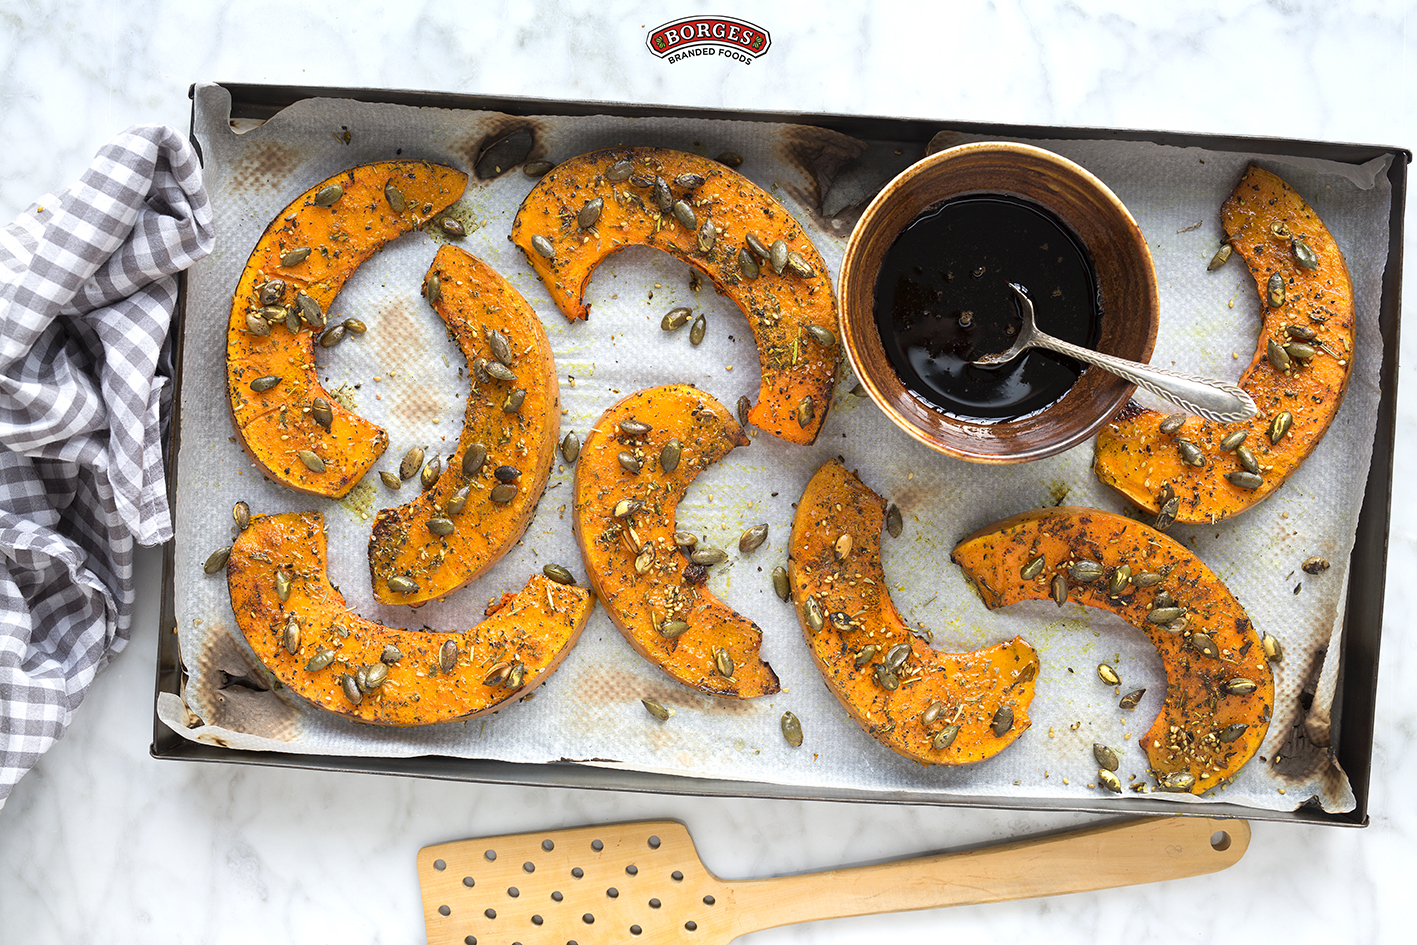 Borges - Baked pumpkin with balsamic vinegar and spices